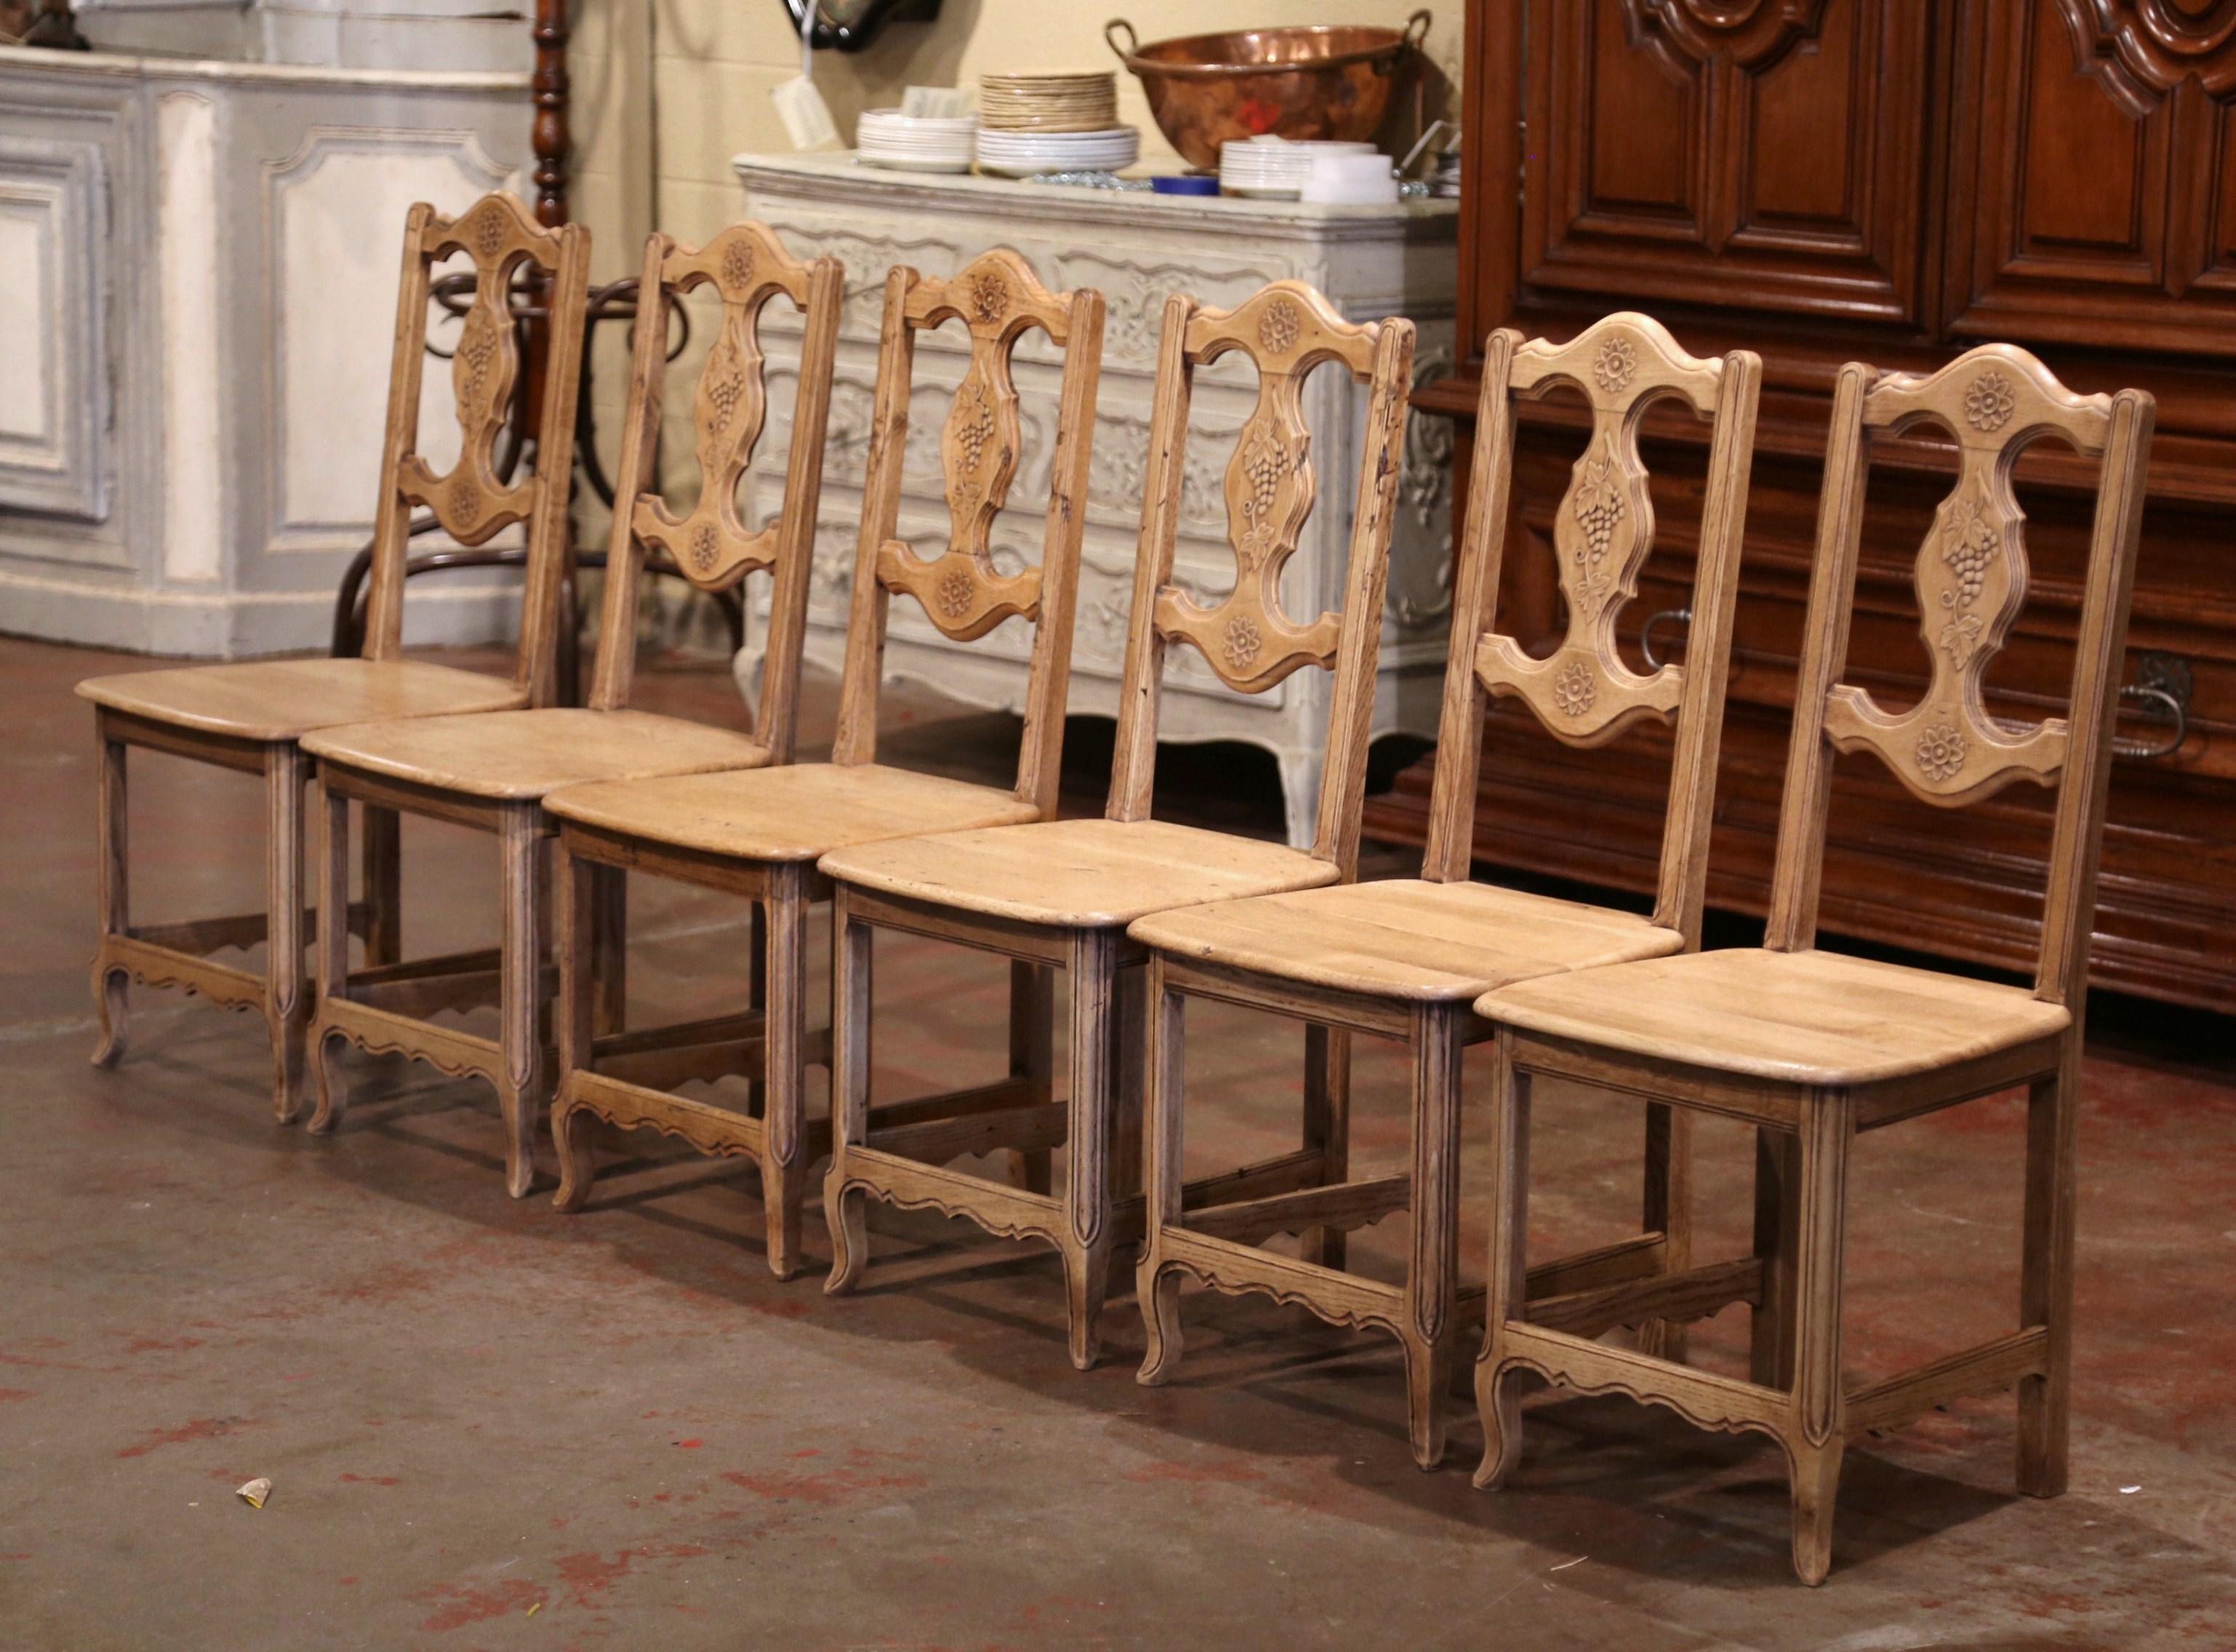 Early 20th Century French Carved Oak Dining Chairs with Vine Motifs, Set of Six For Sale 1